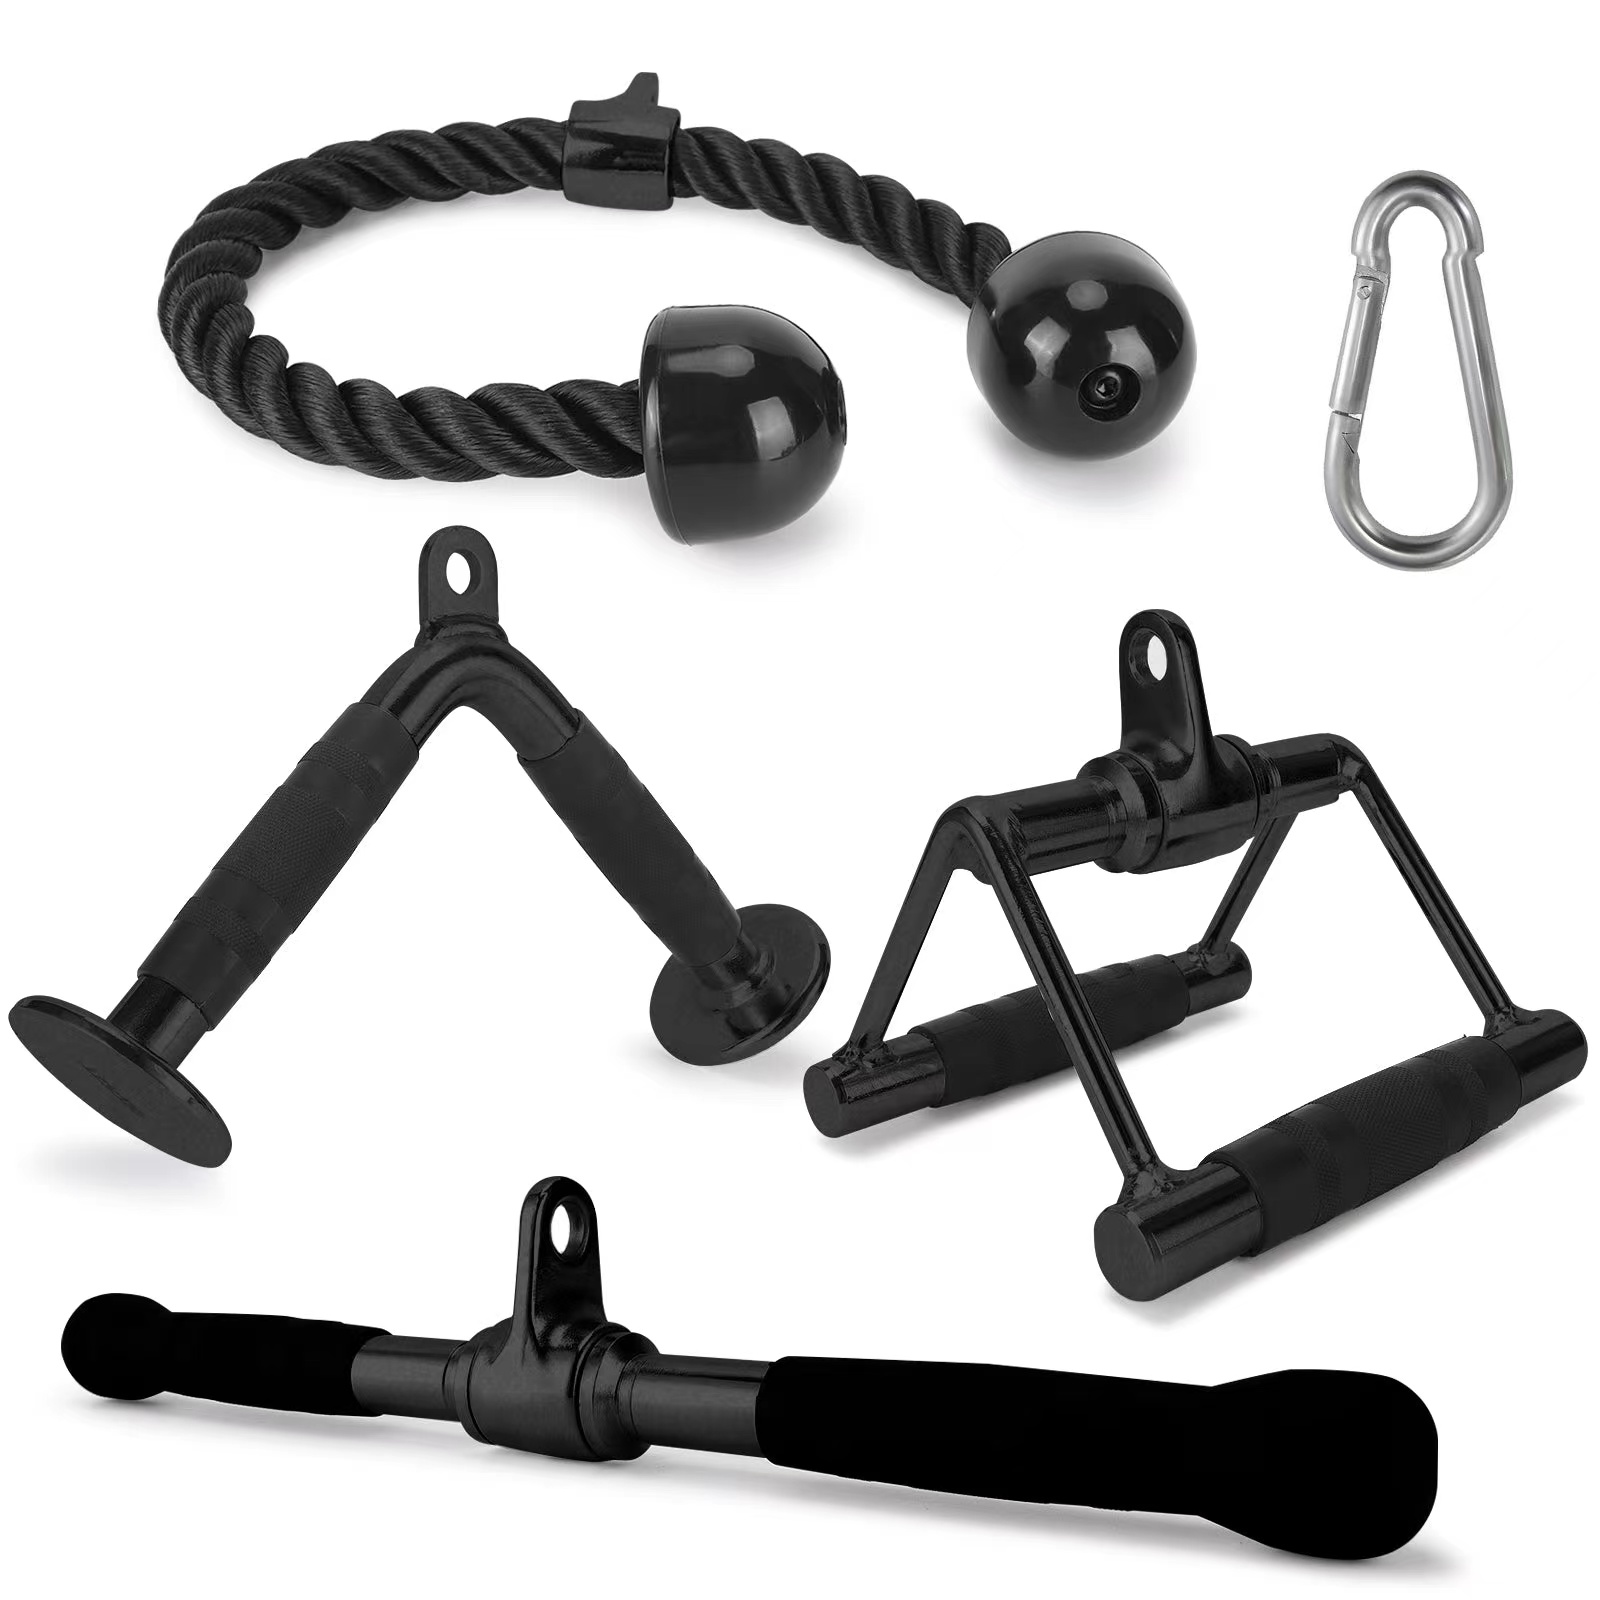 CABLE ATTACHMENT SET OF 4 D HANDLE, V HANDLE WITH ROTATION, ROTATING BAR, TRICEP ROPE, V-SHAPED BAR - BLACK